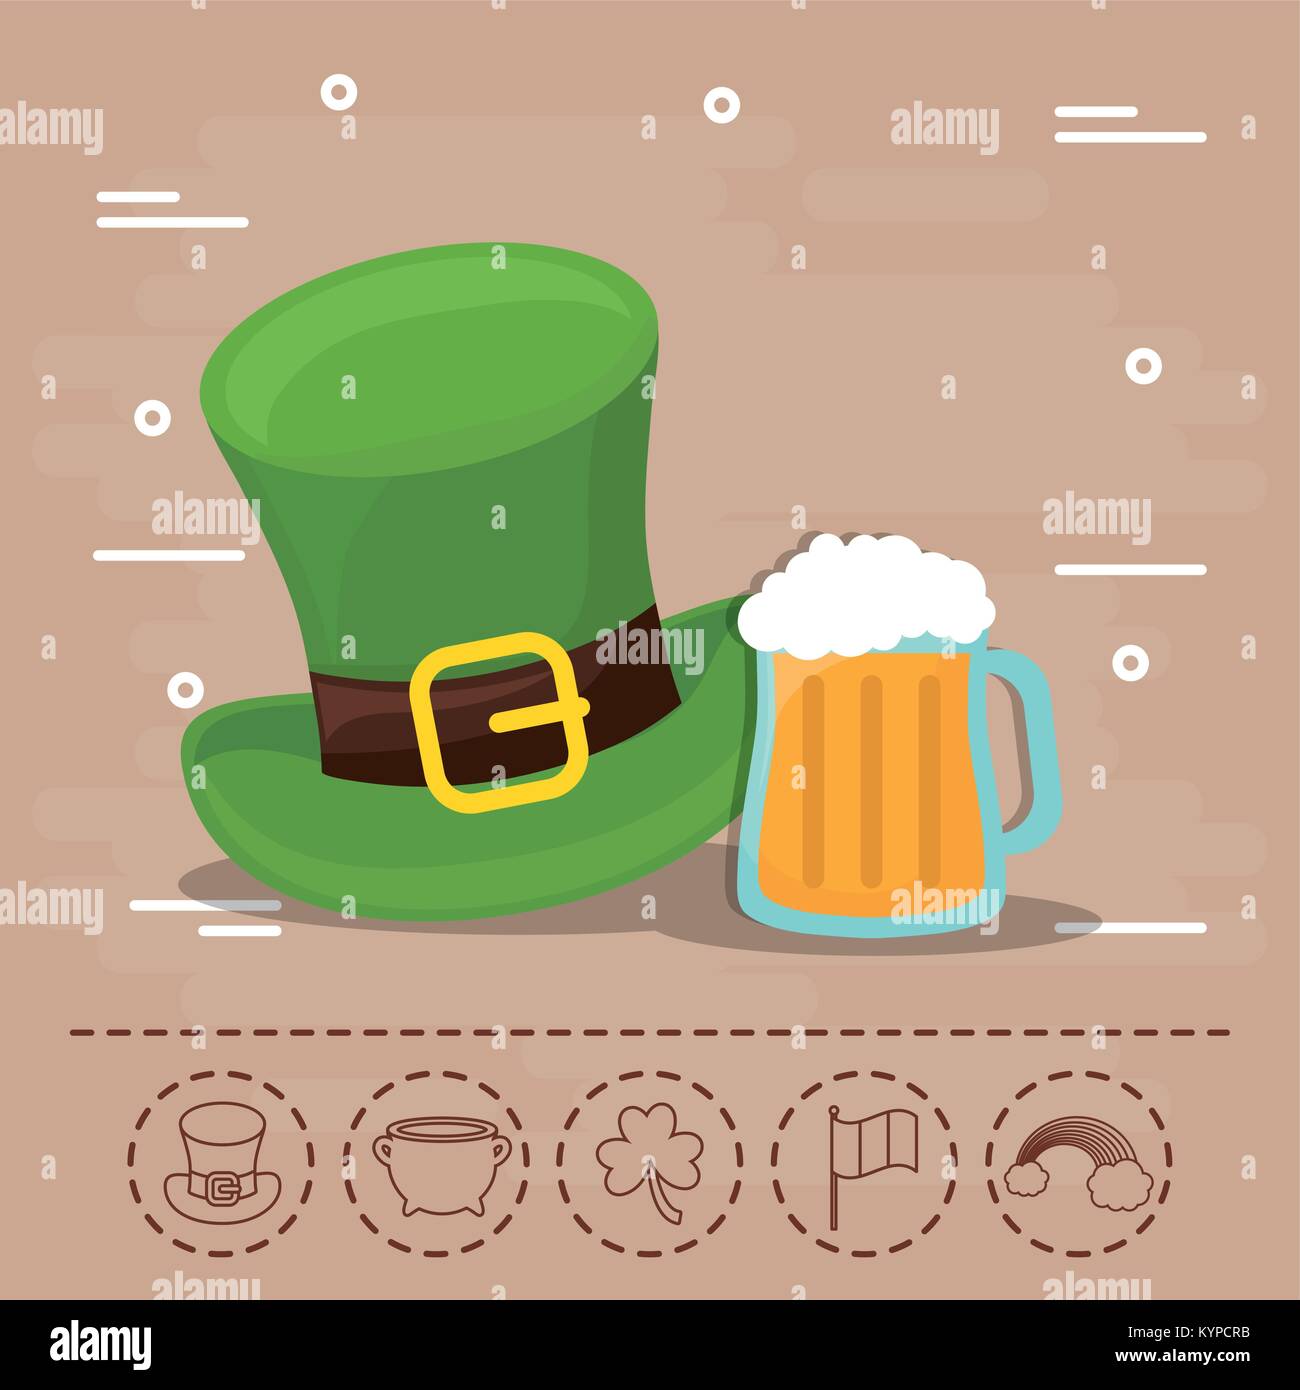 Premium Vector  St patrick's day poster with manuscript glass of beer  horseshoe and clover vector